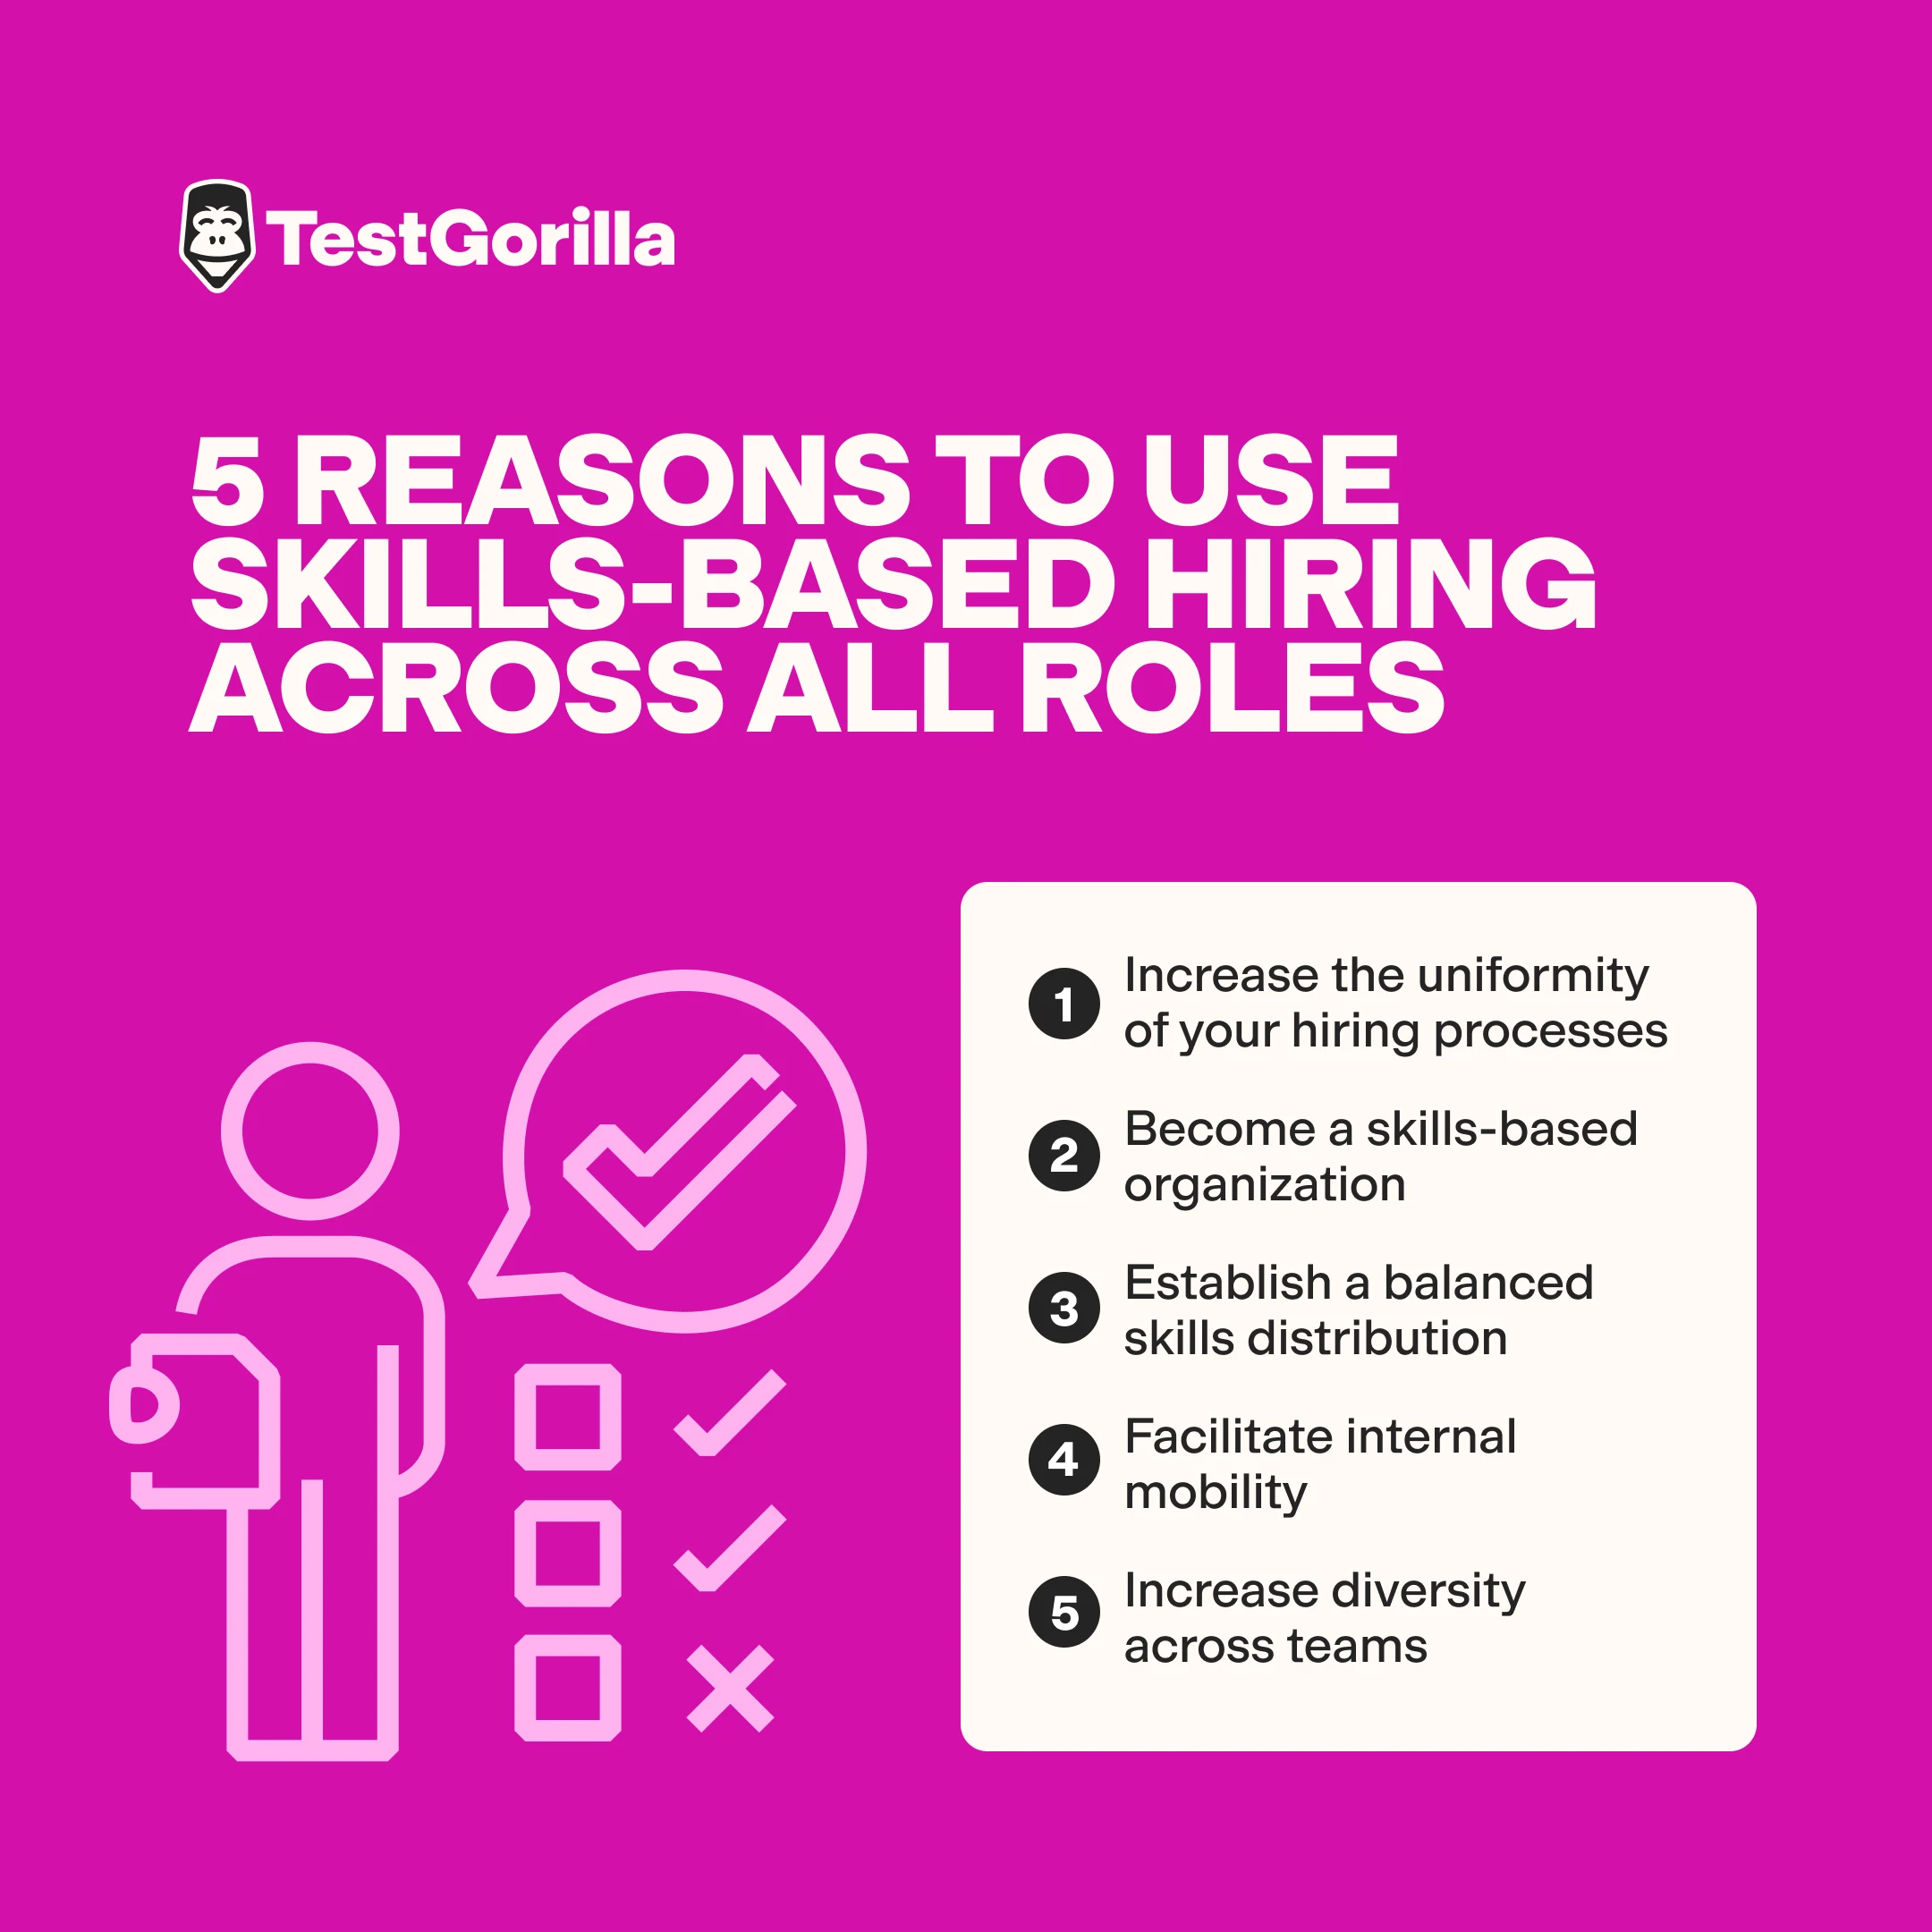 5 reasons to use skills based hiring across all roles graphic